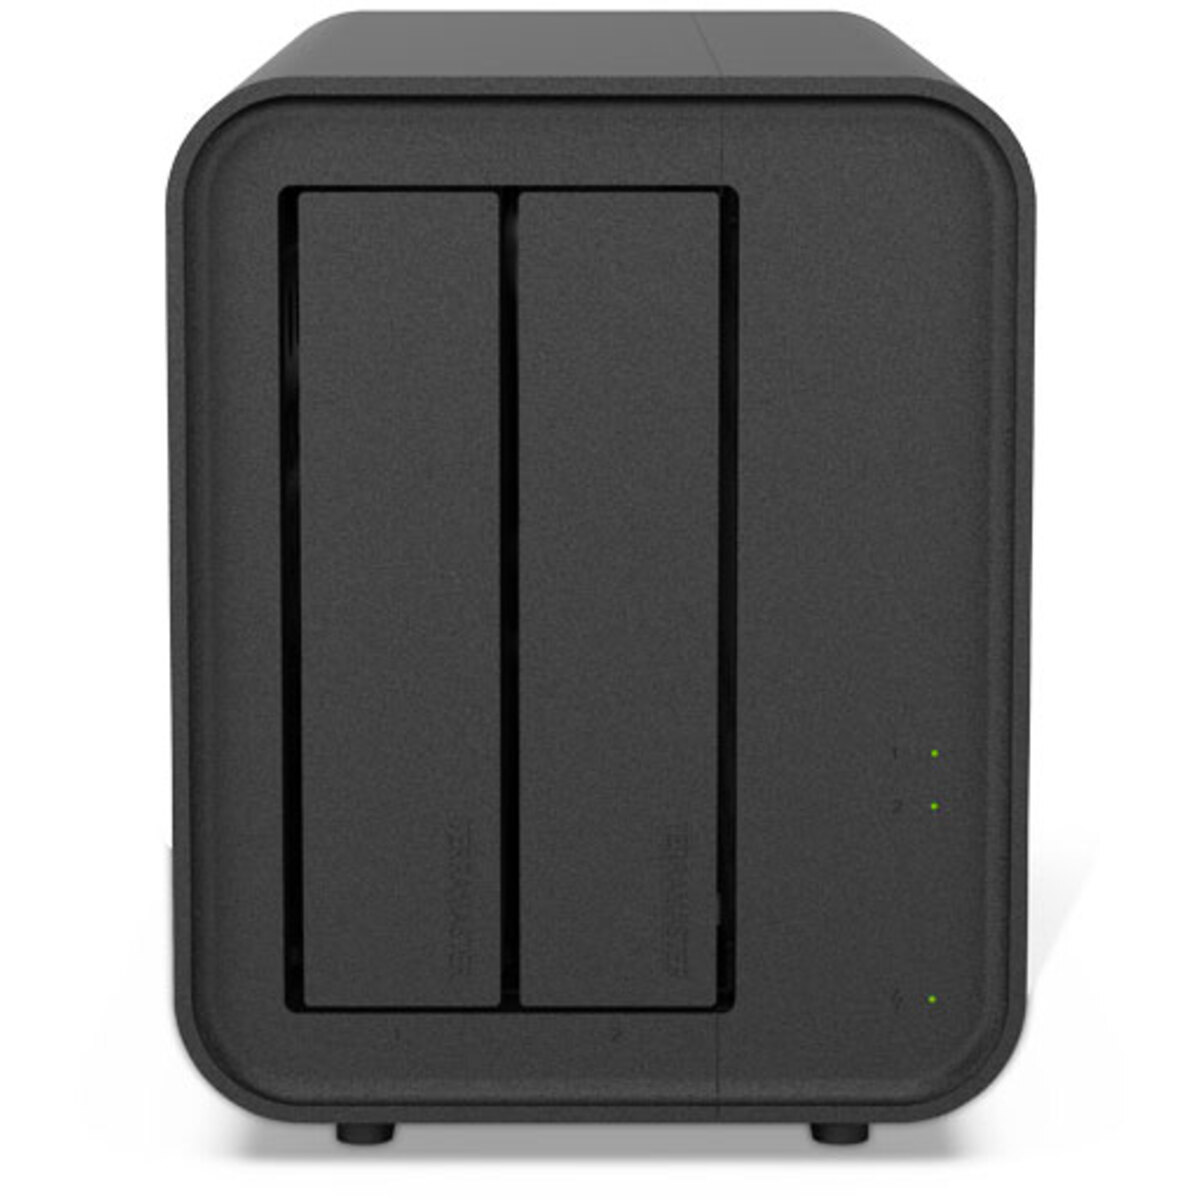 TerraMaster D5 Hybrid 32tb 2-Bay Desktop Multimedia / Power User / Business DAS - Direct Attached Storage Device 2x16tb Seagate IronWolf Pro ST16000NT001 3.5 7200rpm SATA 6Gb/s HDD NAS Class Drives Installed - Burn-In Tested - ON SALE D5 Hybrid